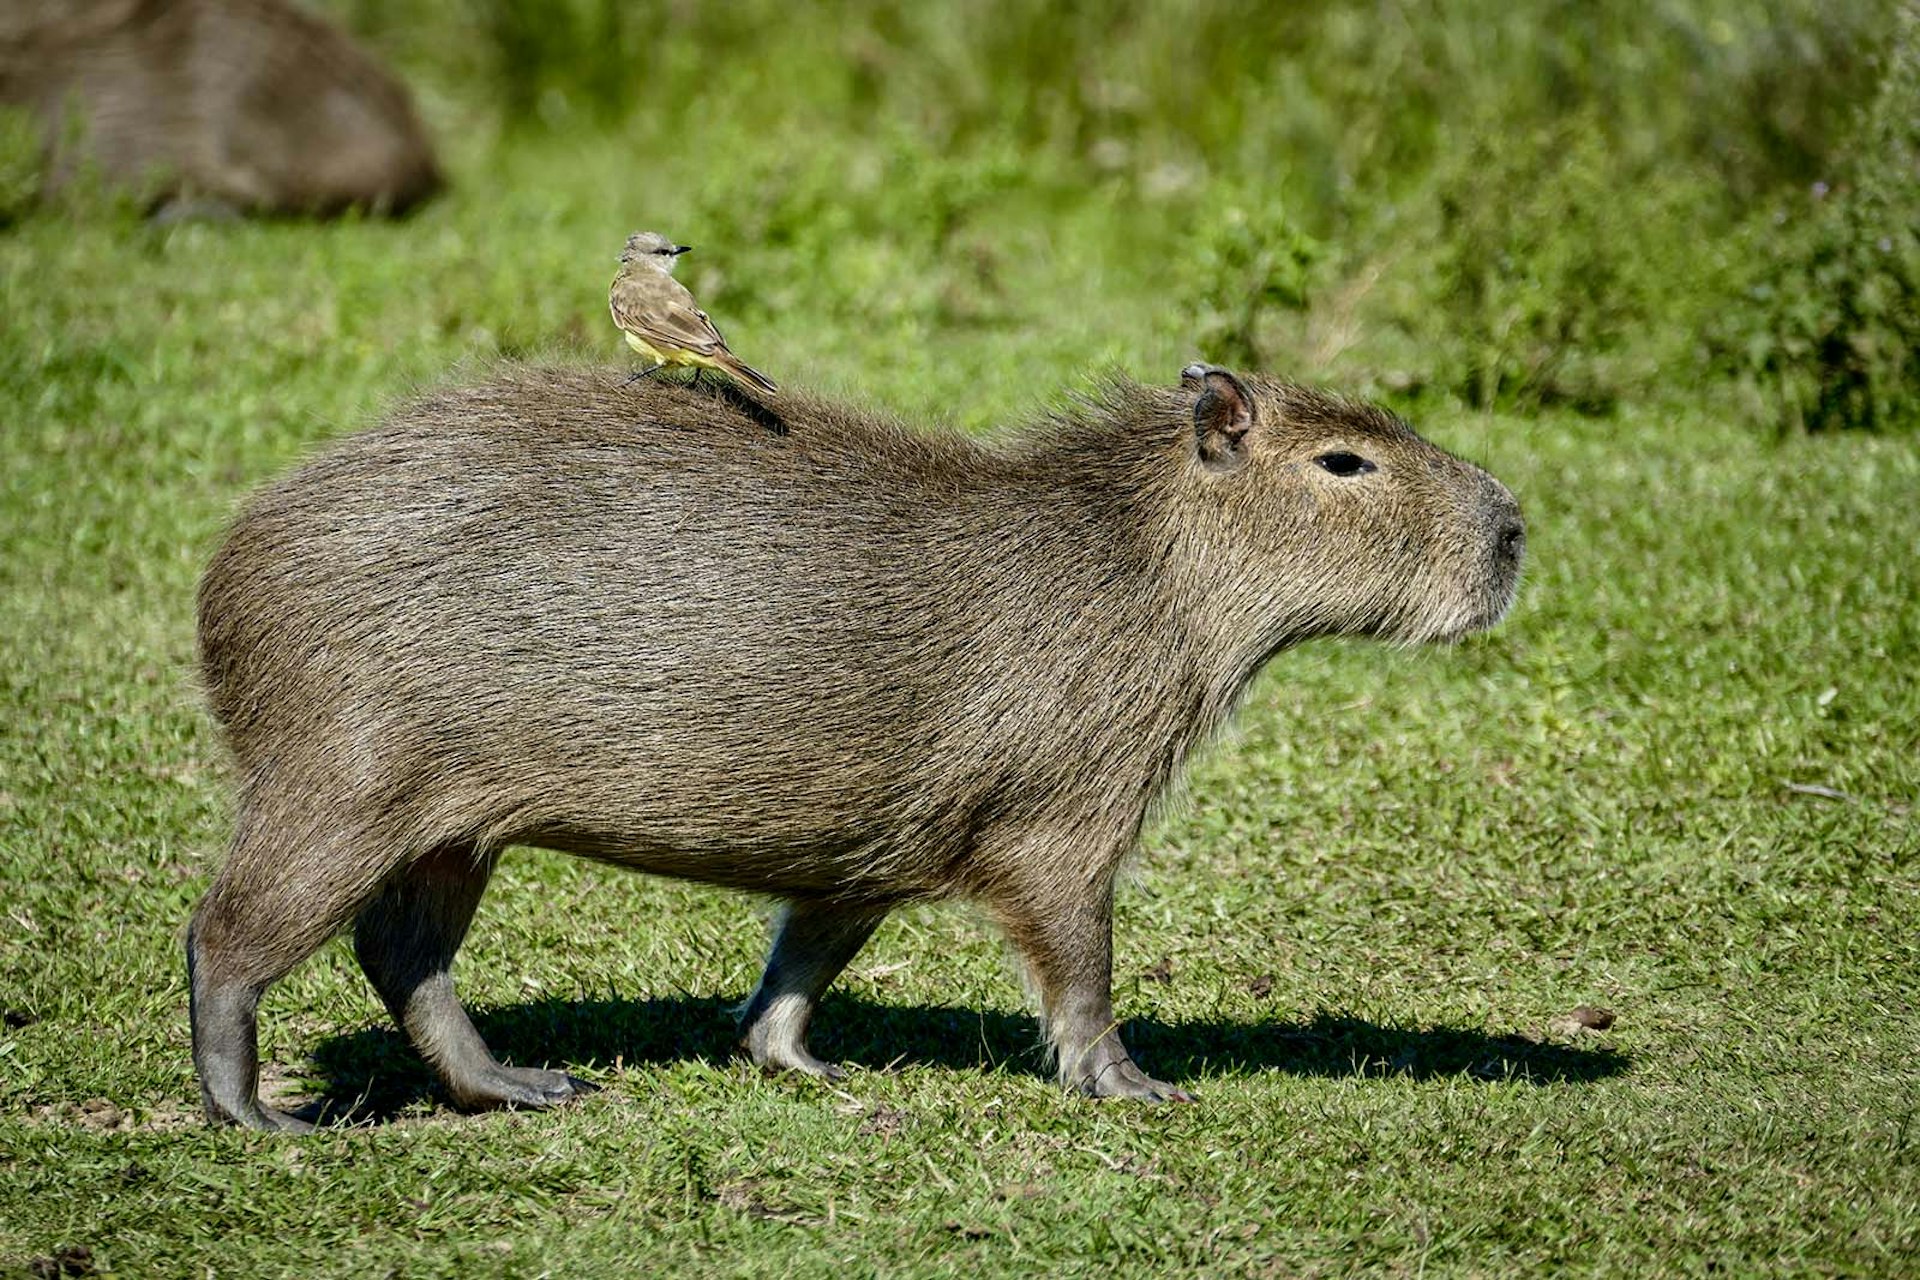 A capybara walks across the grass with a small brown and yellow bird on its back. Ibera National Park, Northeast Argentina